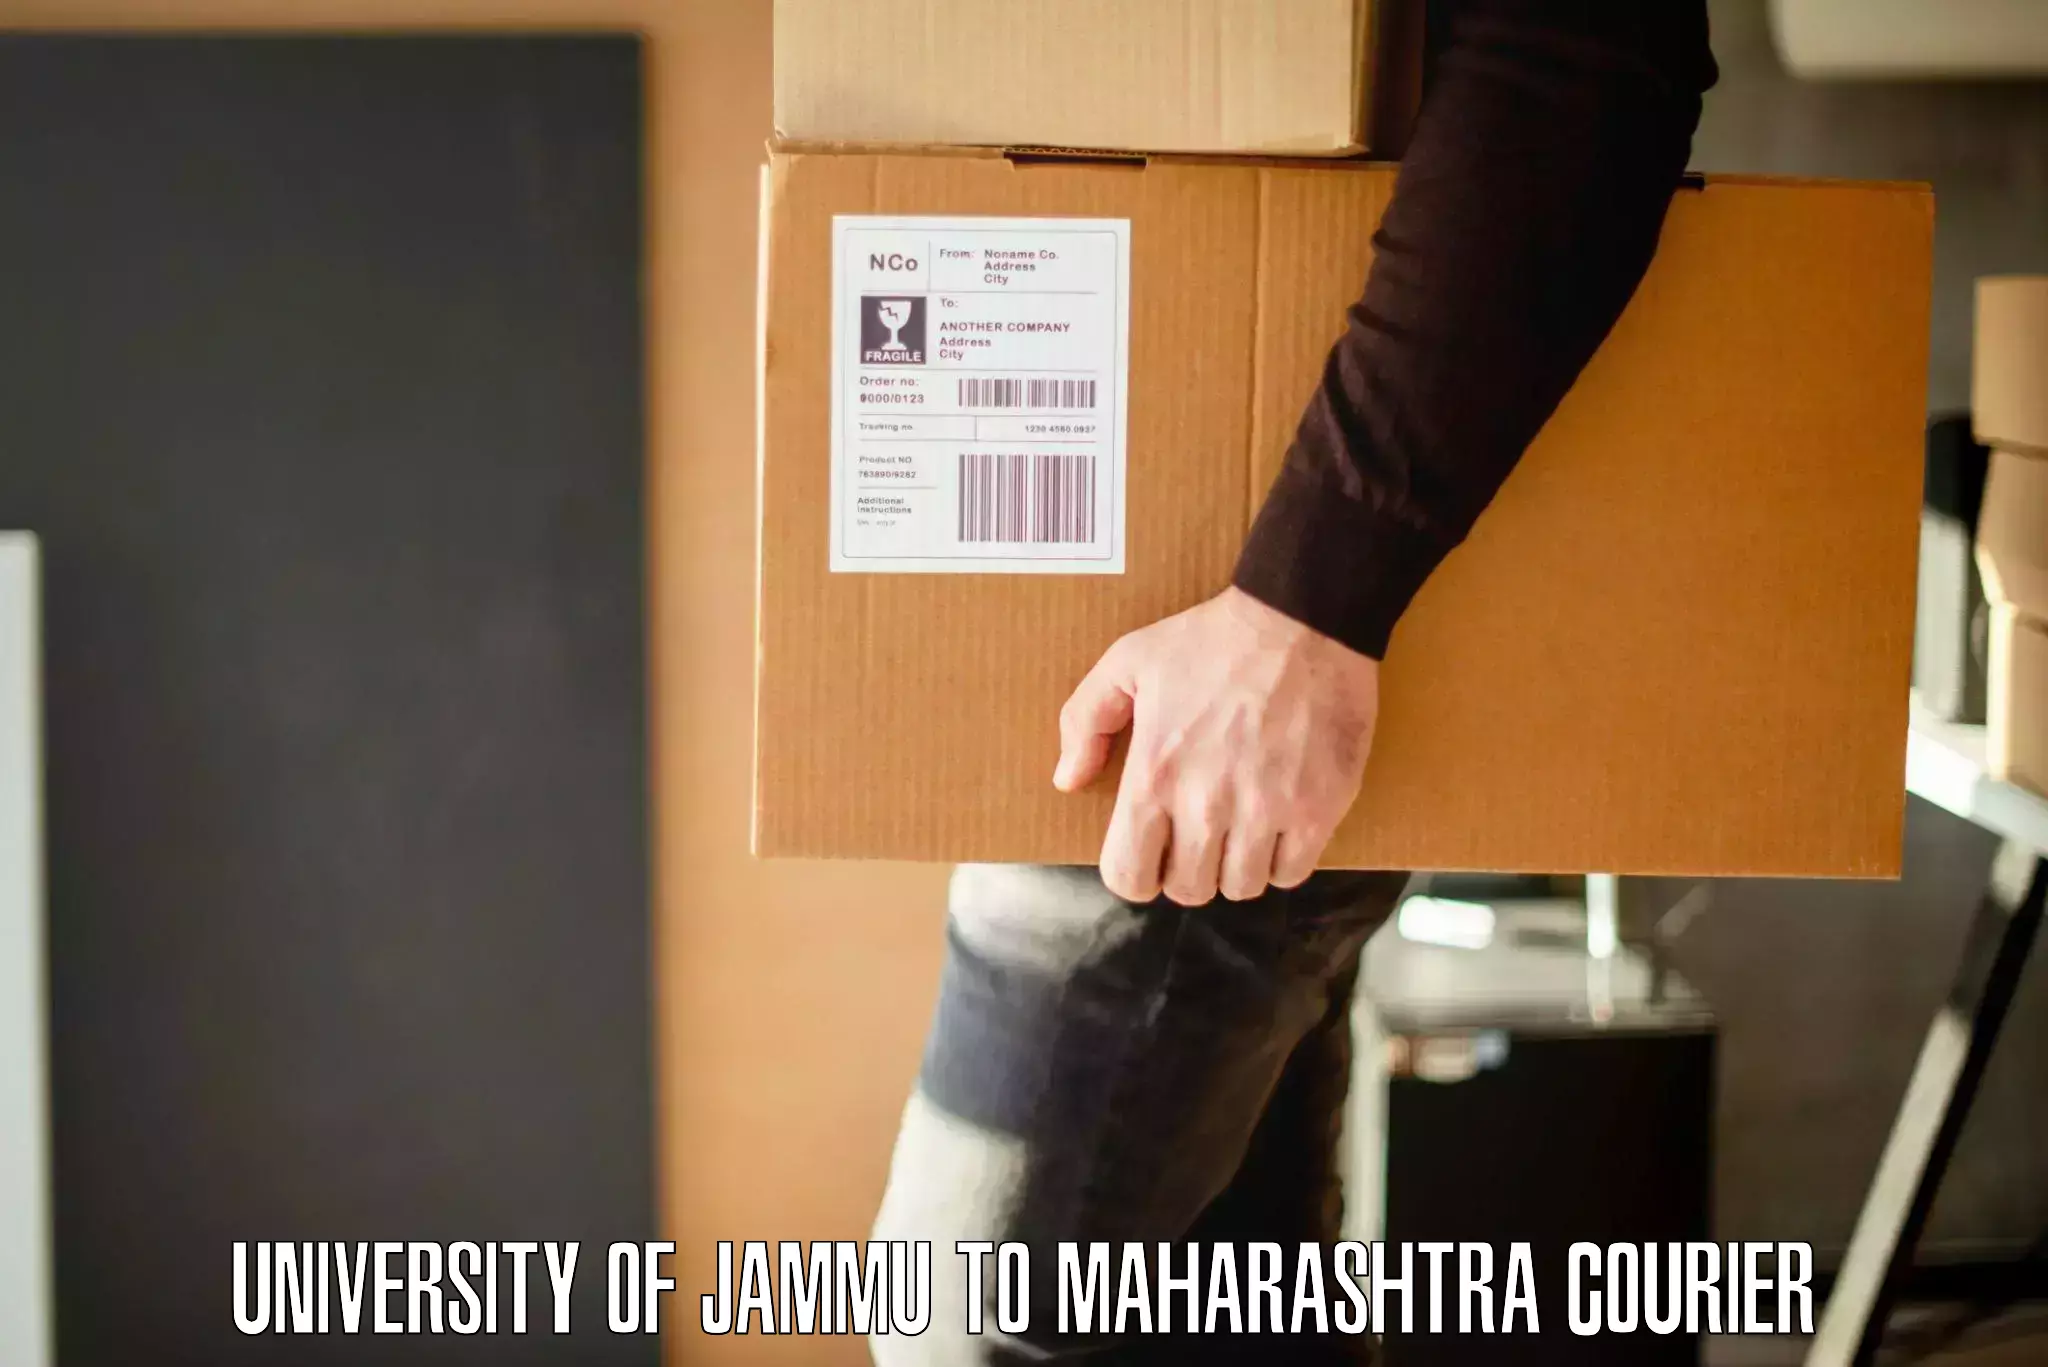 Quality moving company in University of Jammu to Mahad